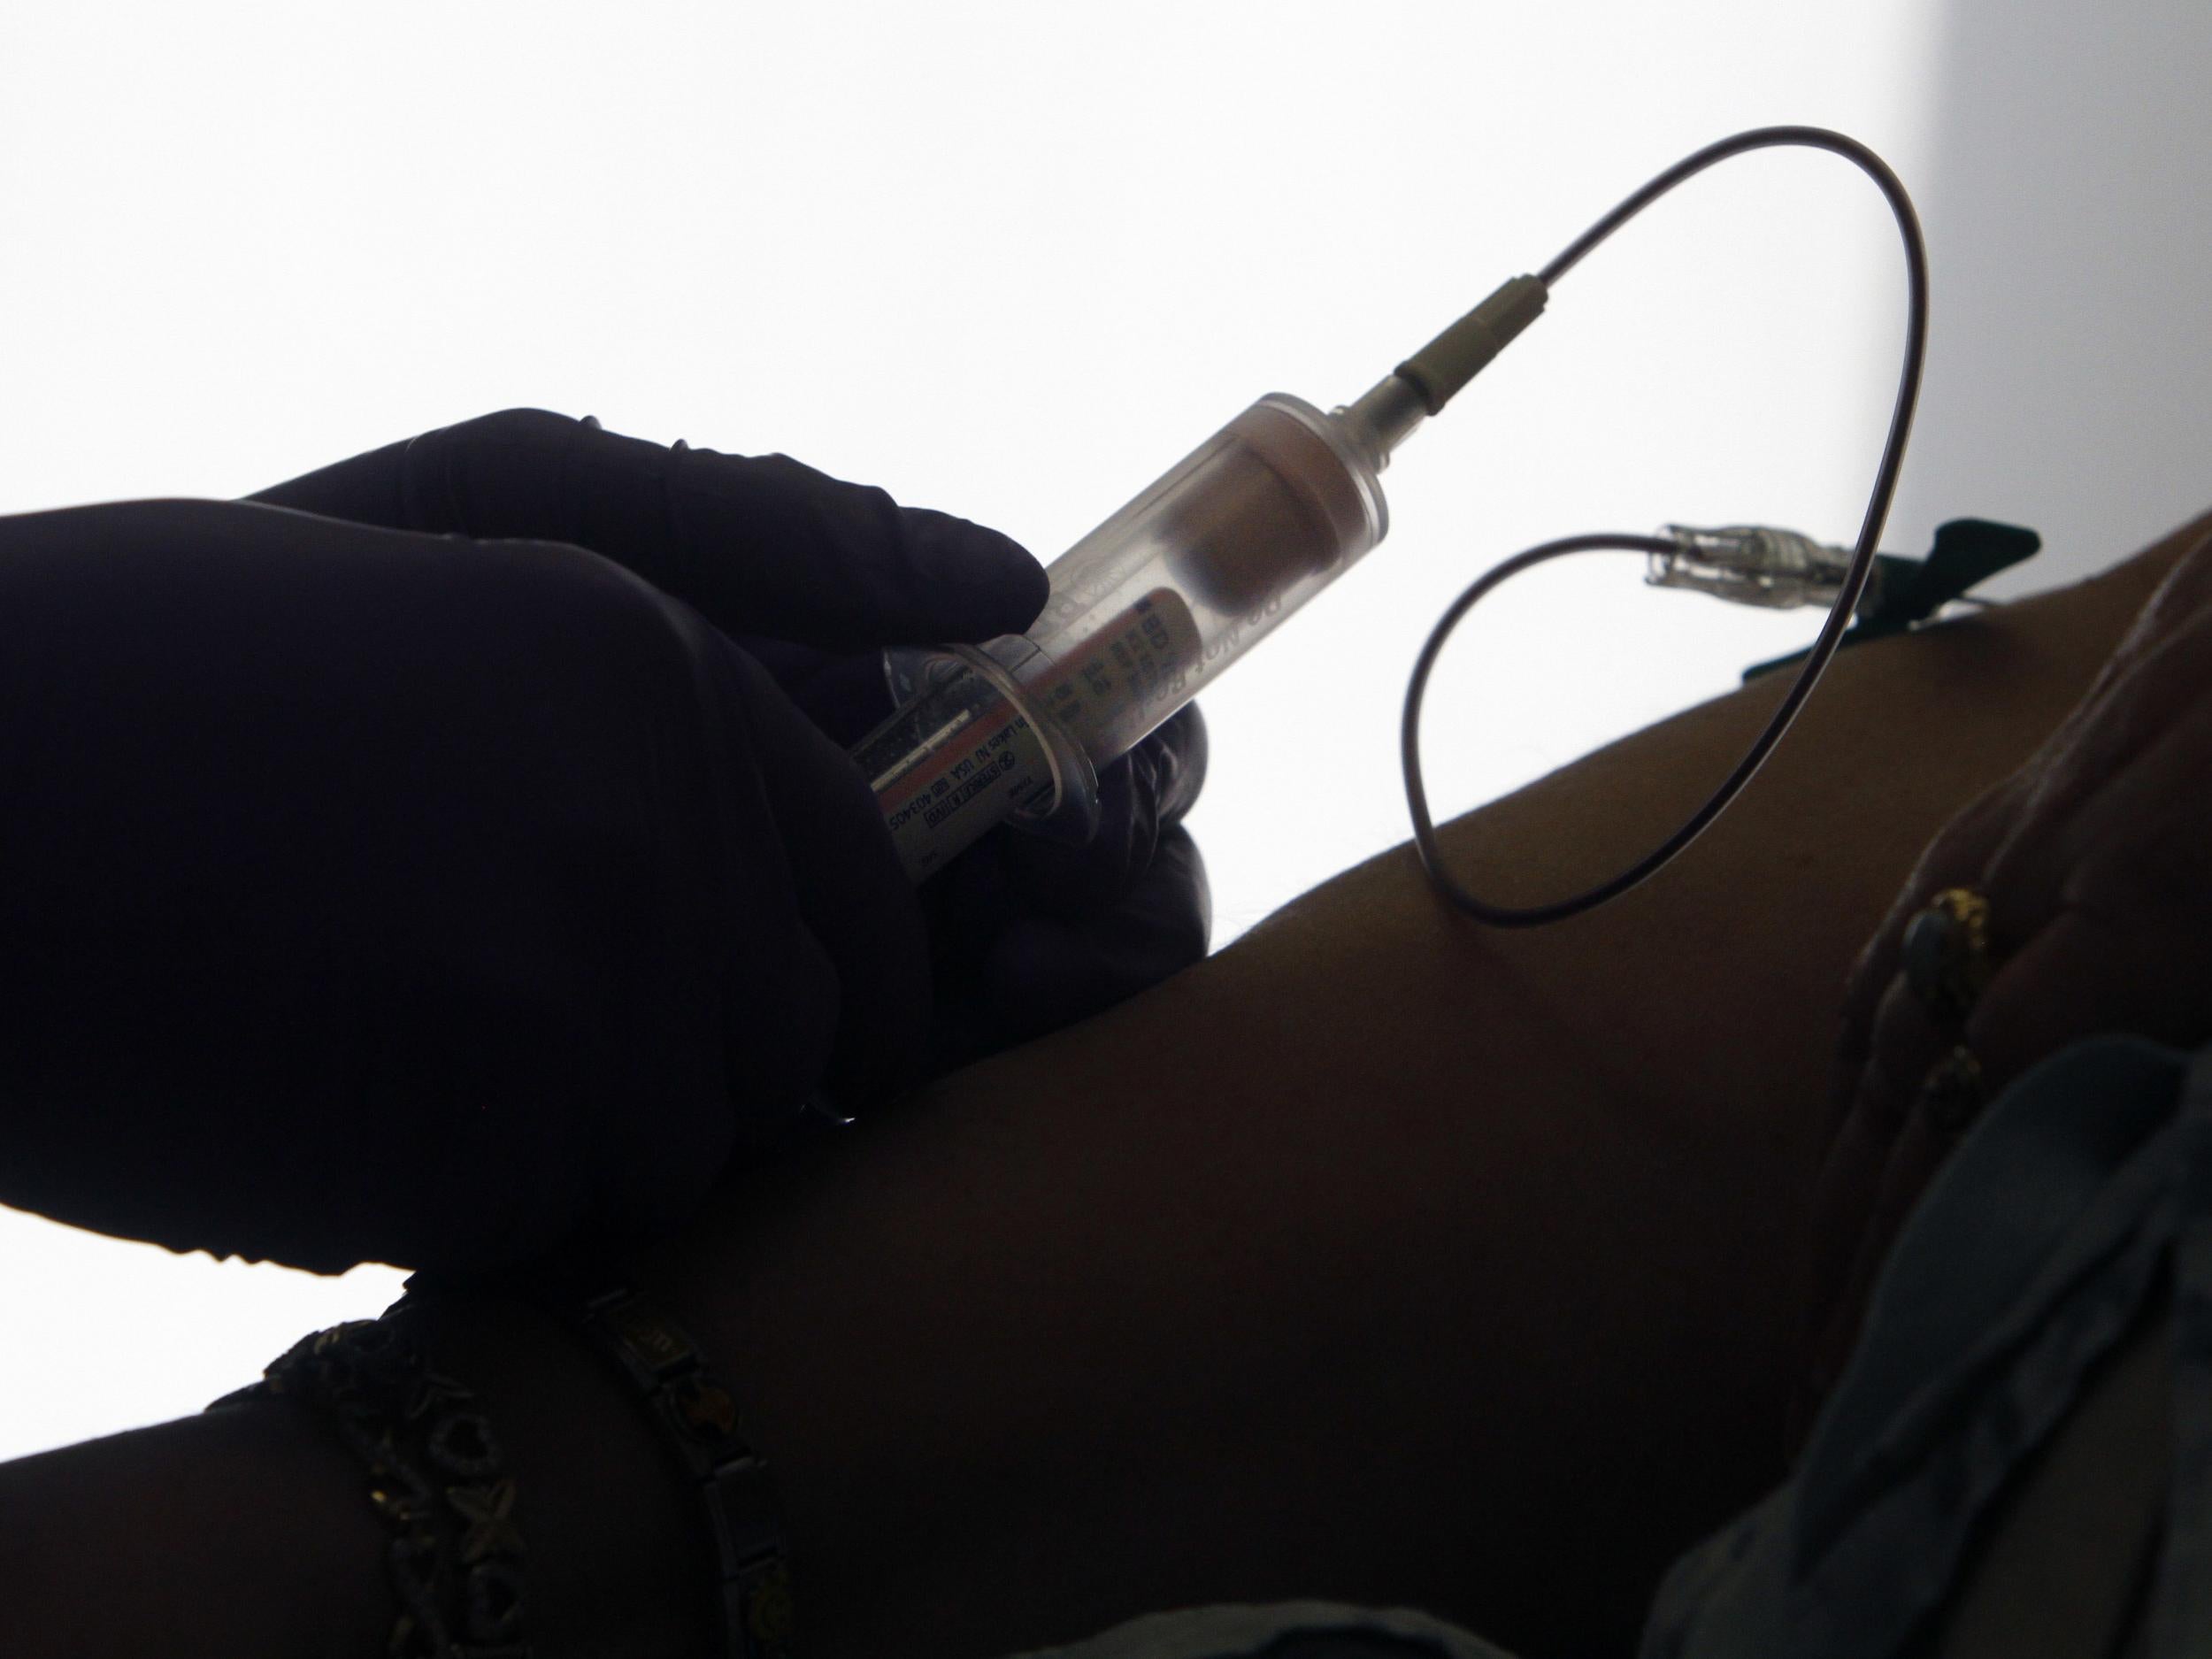 A patient has her blood drawn